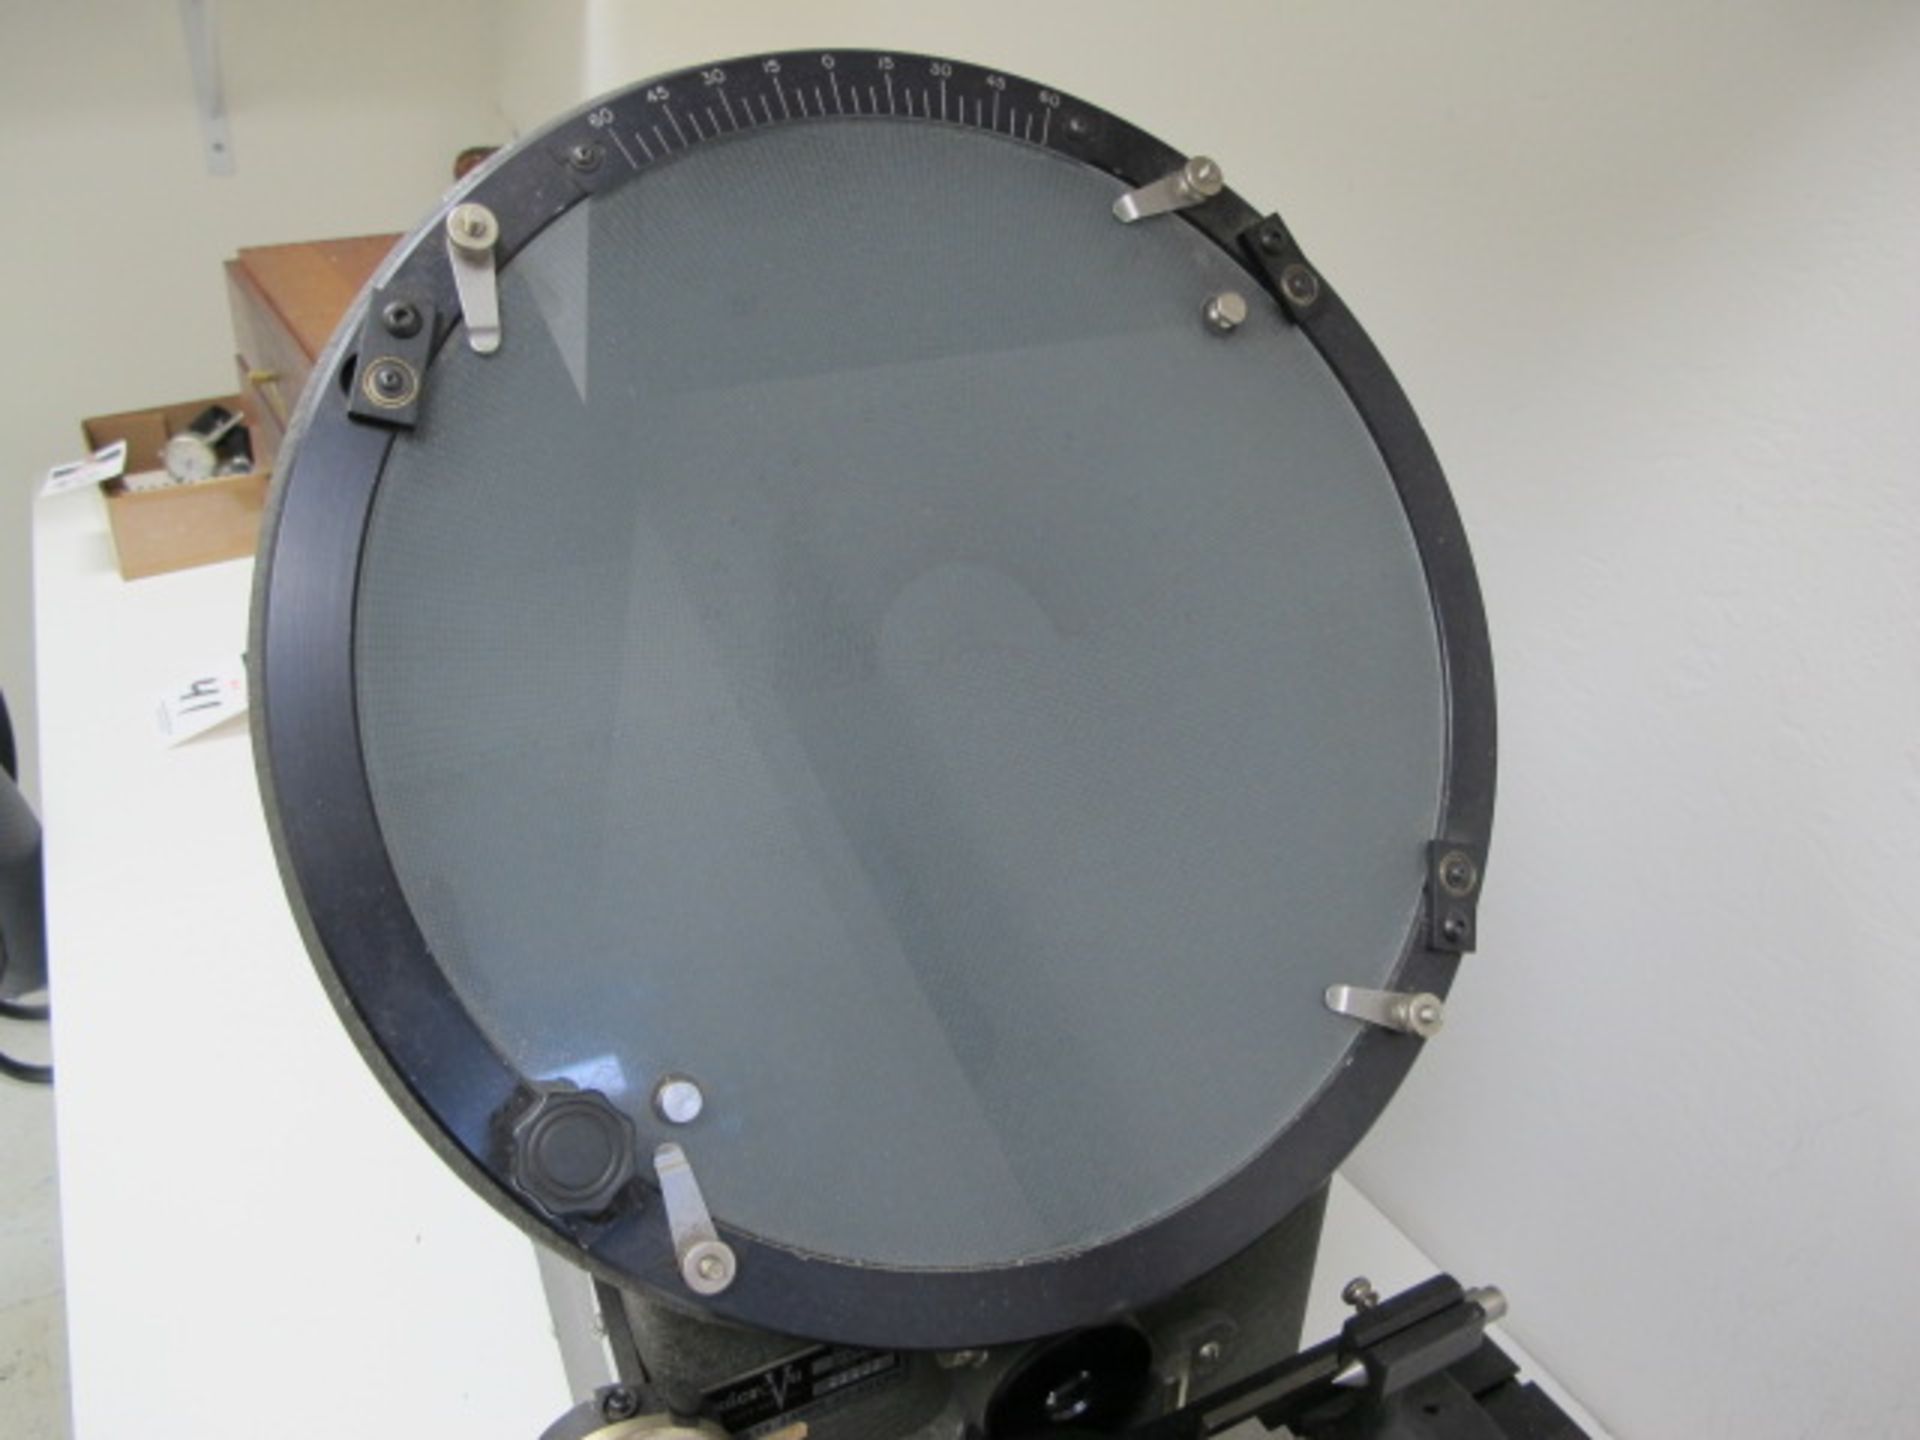 MicroVu mdl. 500HP 10” Optical Comparator s/n 22002 w/ Acces - Image 3 of 4